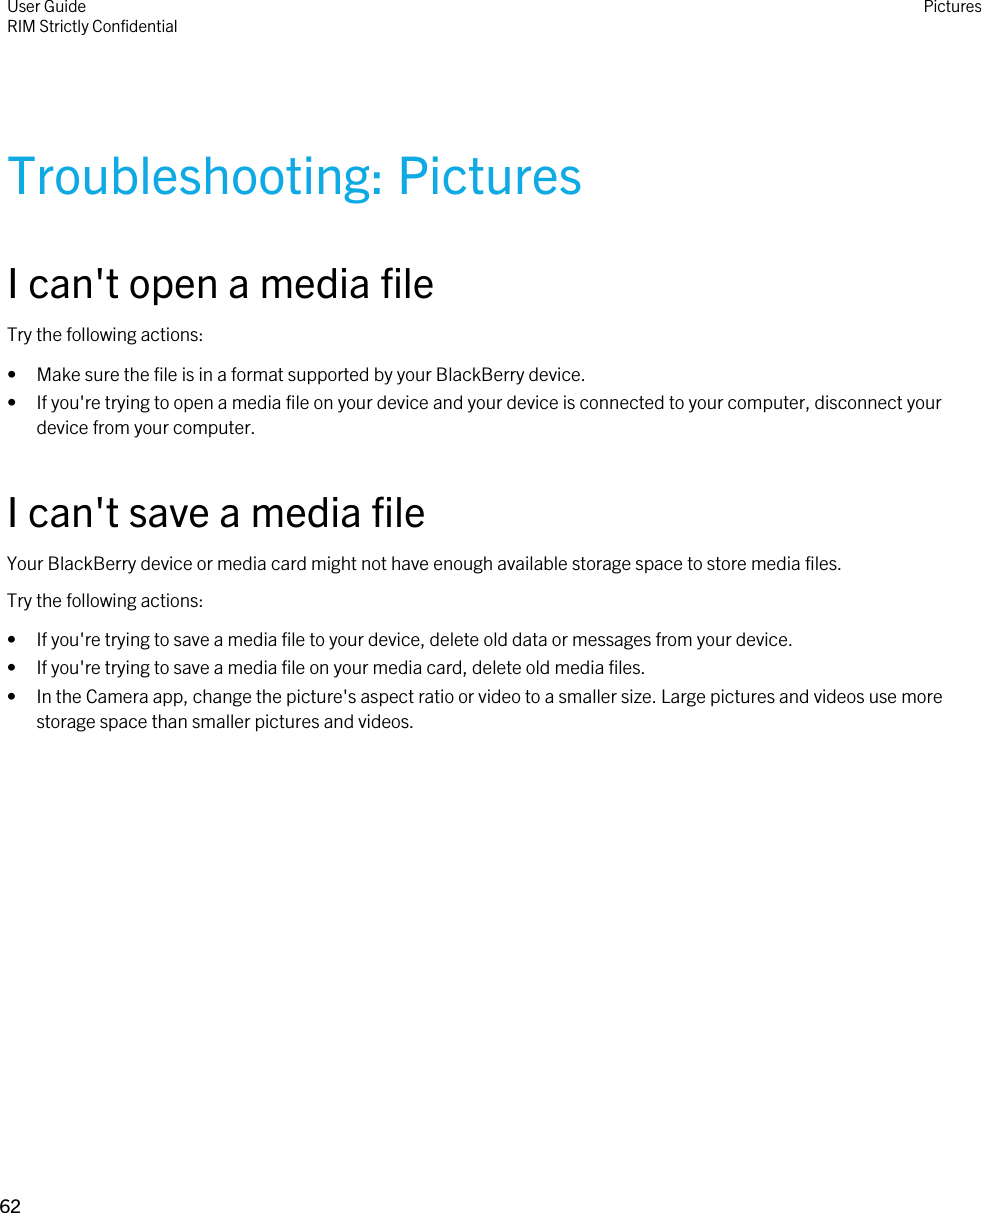 Troubleshooting: PicturesI can&apos;t open a media fileTry the following actions:• Make sure the file is in a format supported by your BlackBerry device.• If you&apos;re trying to open a media file on your device and your device is connected to your computer, disconnect your device from your computer.I can&apos;t save a media fileYour BlackBerry device or media card might not have enough available storage space to store media files.Try the following actions:• If you&apos;re trying to save a media file to your device, delete old data or messages from your device.• If you&apos;re trying to save a media file on your media card, delete old media files.• In the Camera app, change the picture&apos;s aspect ratio or video to a smaller size. Large pictures and videos use more storage space than smaller pictures and videos.User GuideRIM Strictly Confidential Pictures62 